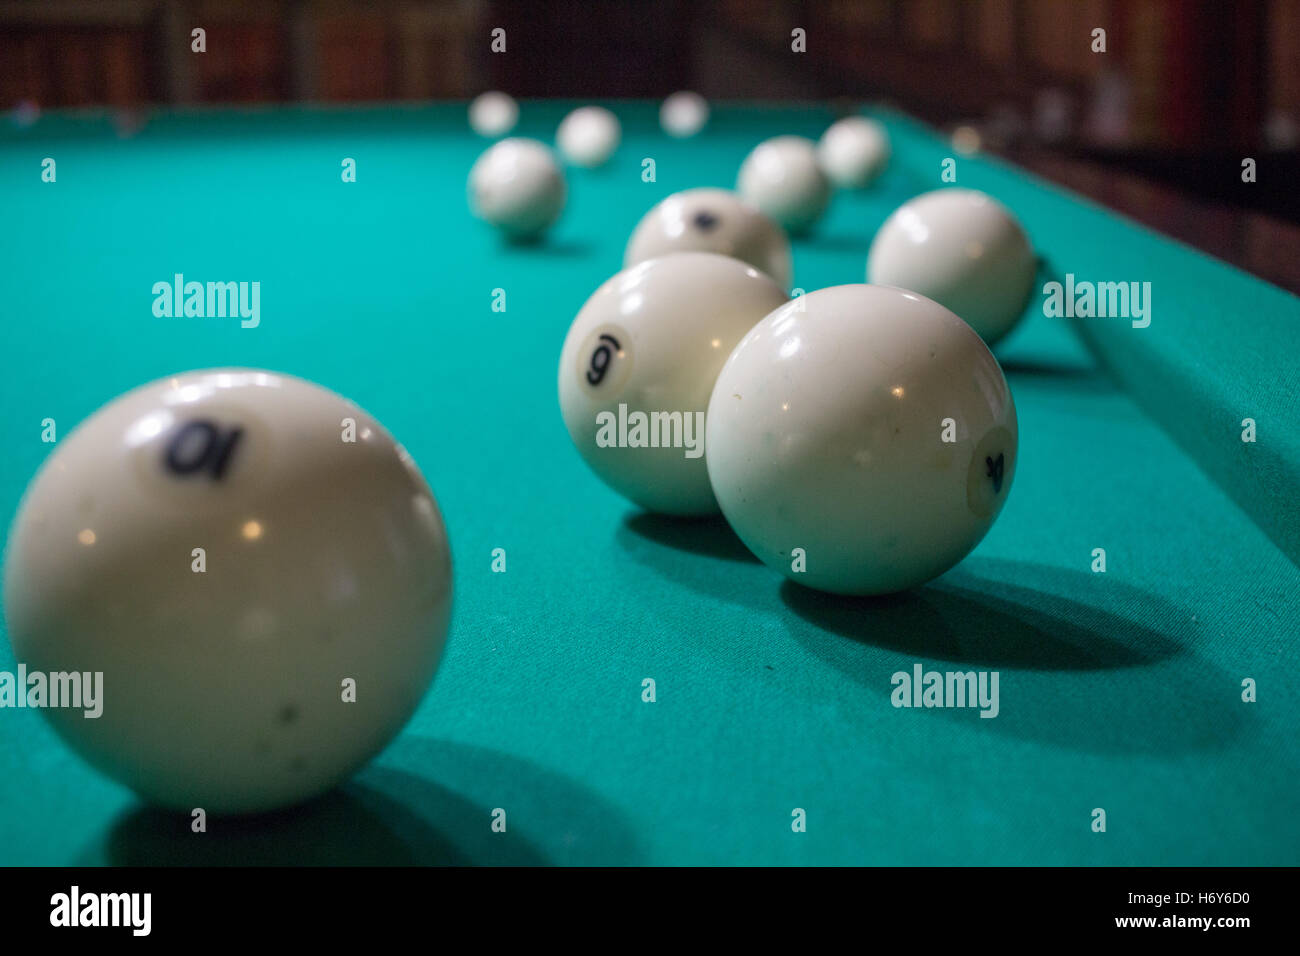 Close-up of Russian billiards game: ball, on green table cloth Stock Photo